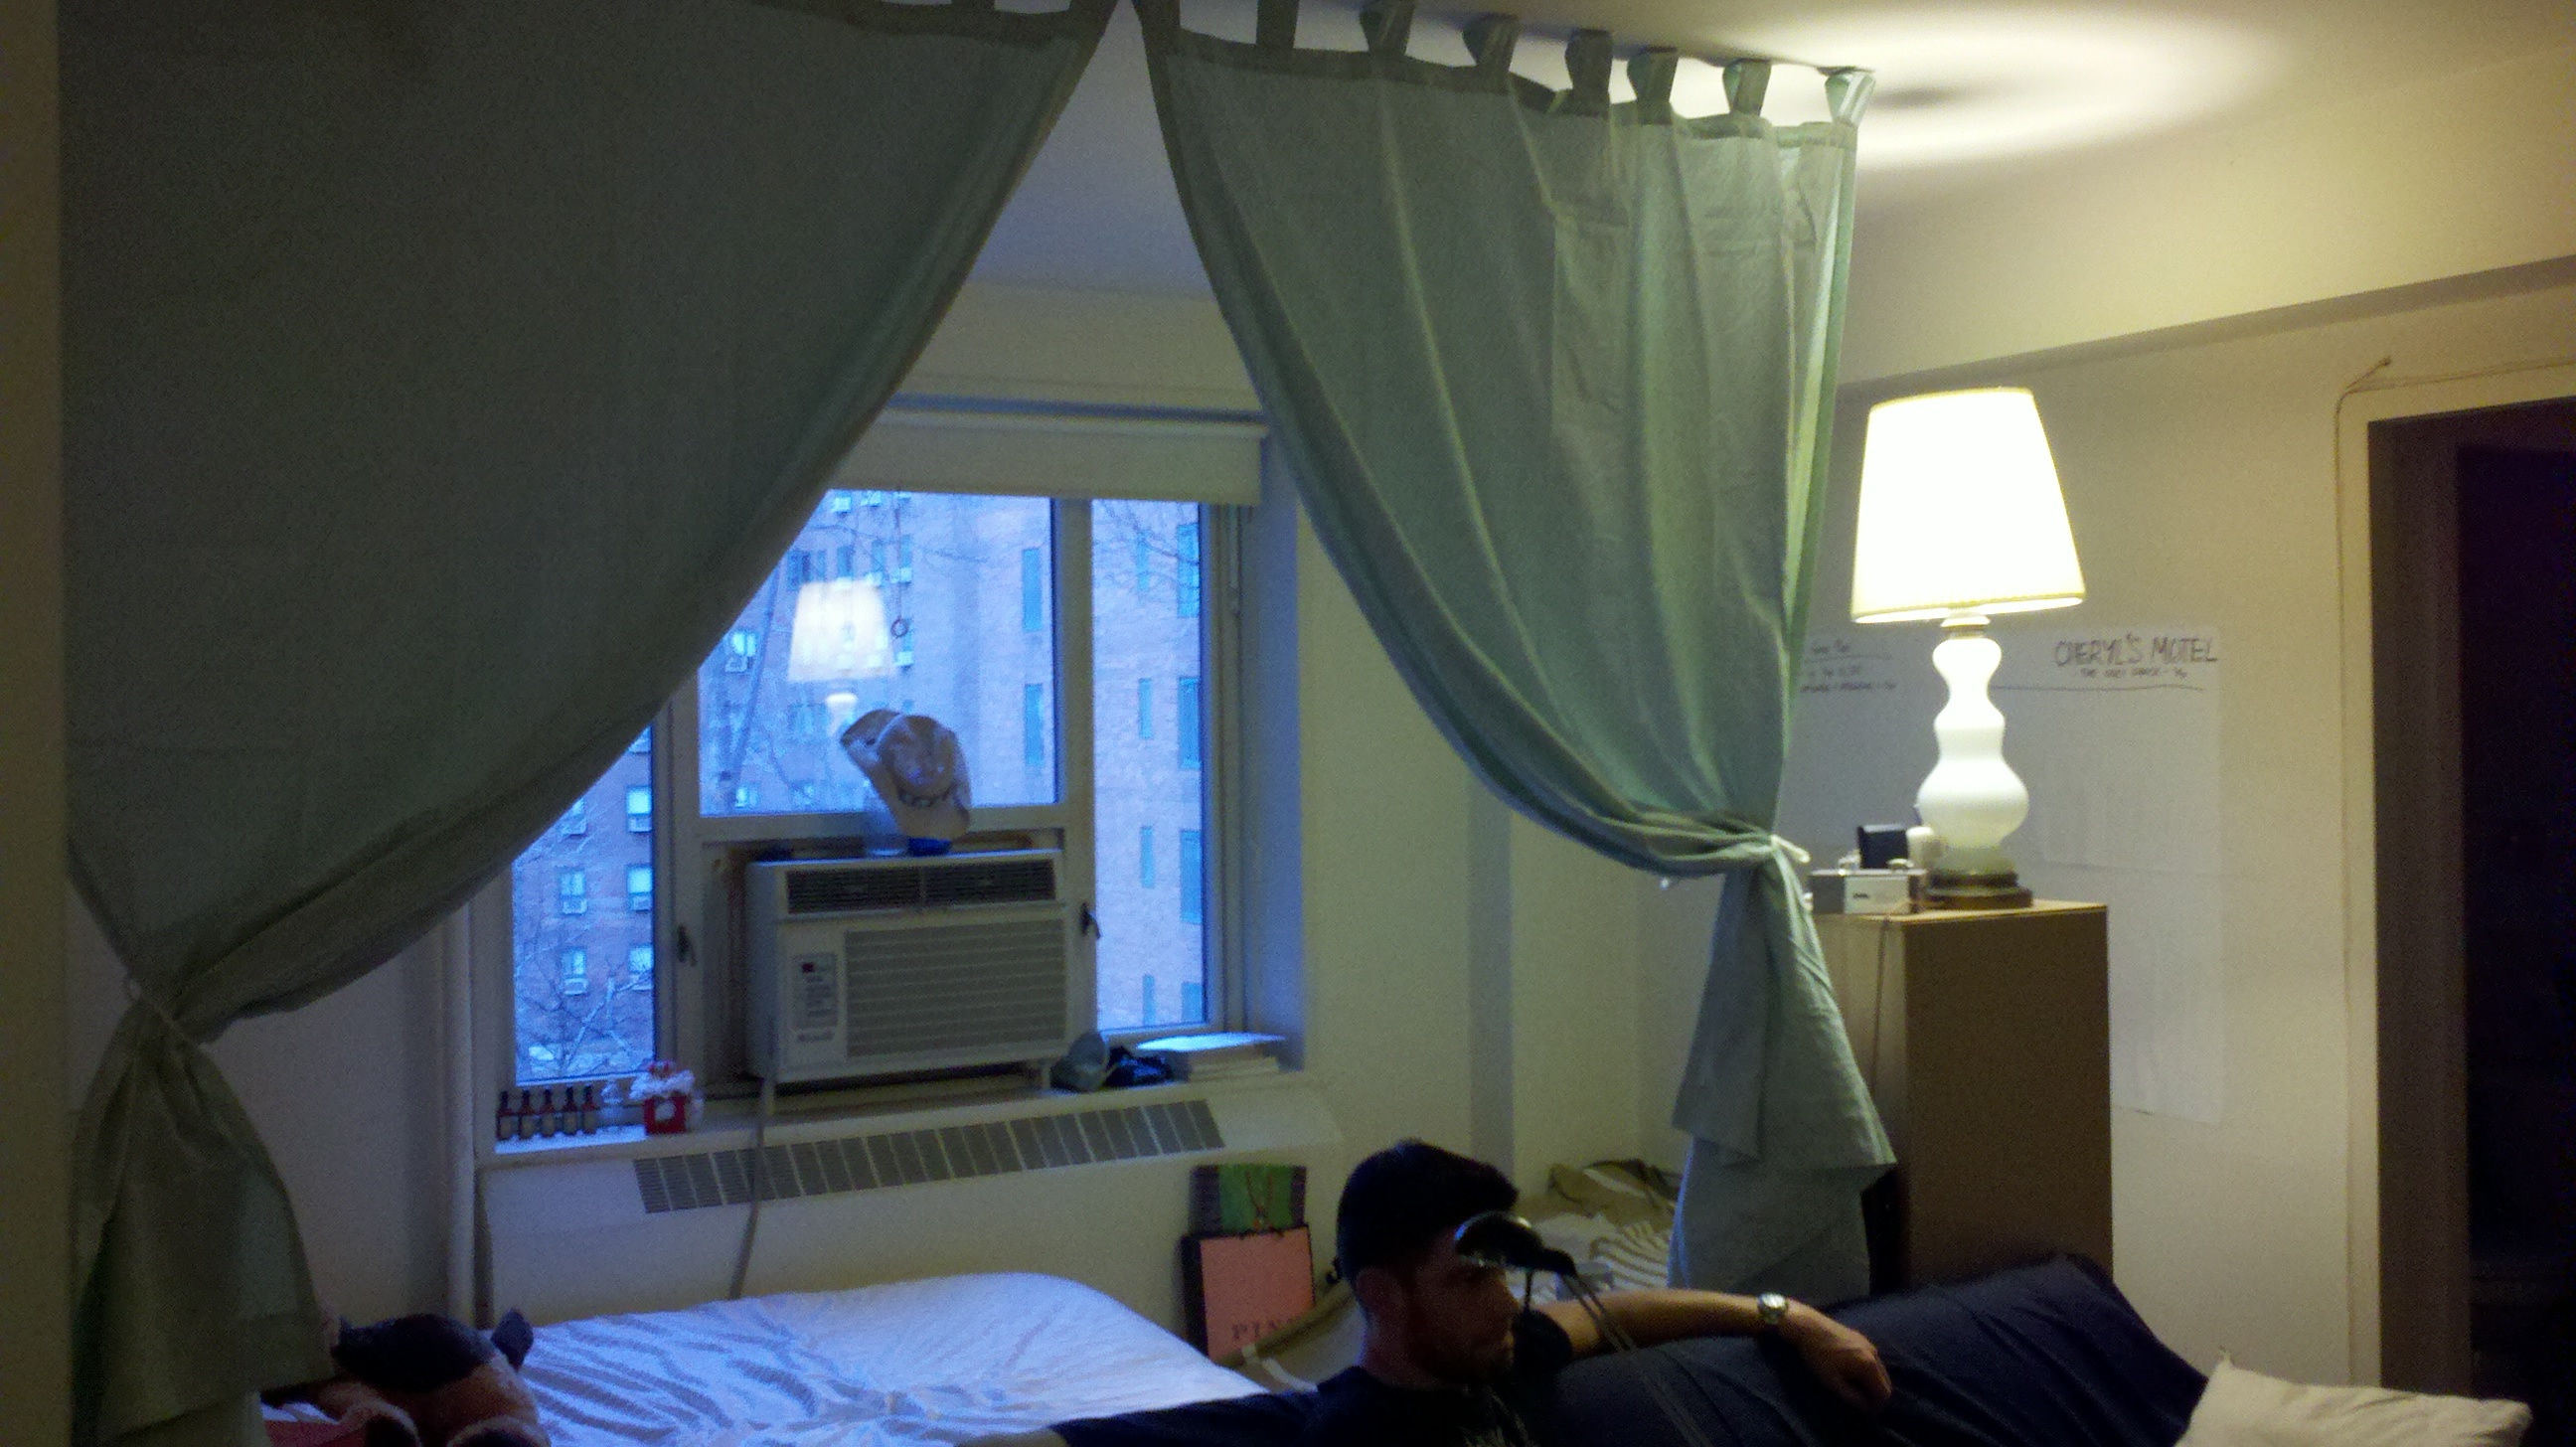 From 1 Bedroom In Gramery To Living Room Futon In Alphabet City